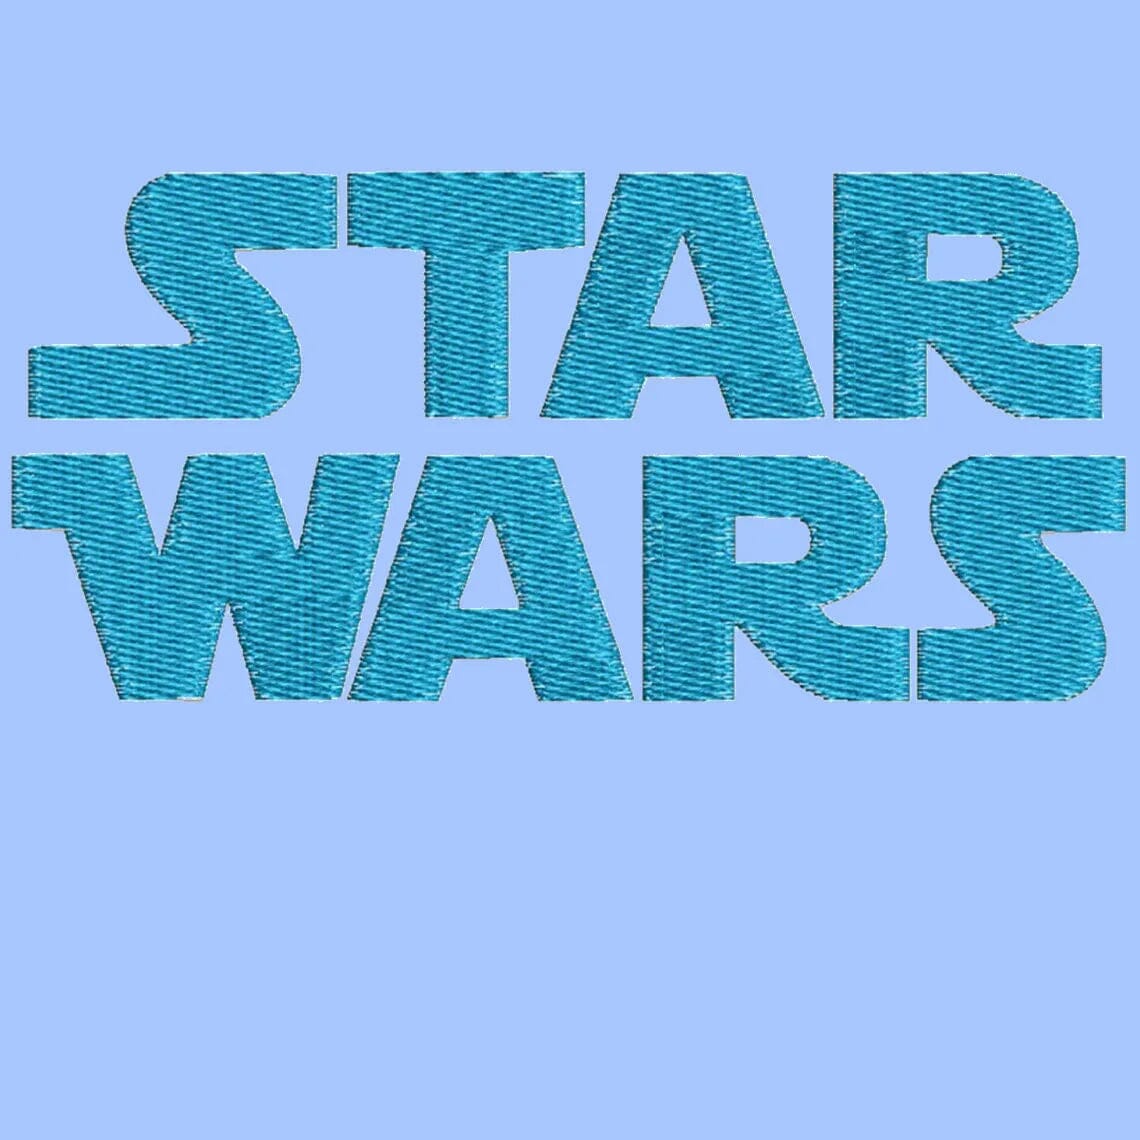 Star Wars Embroidery alphabet Font Set FineryEmbroidery